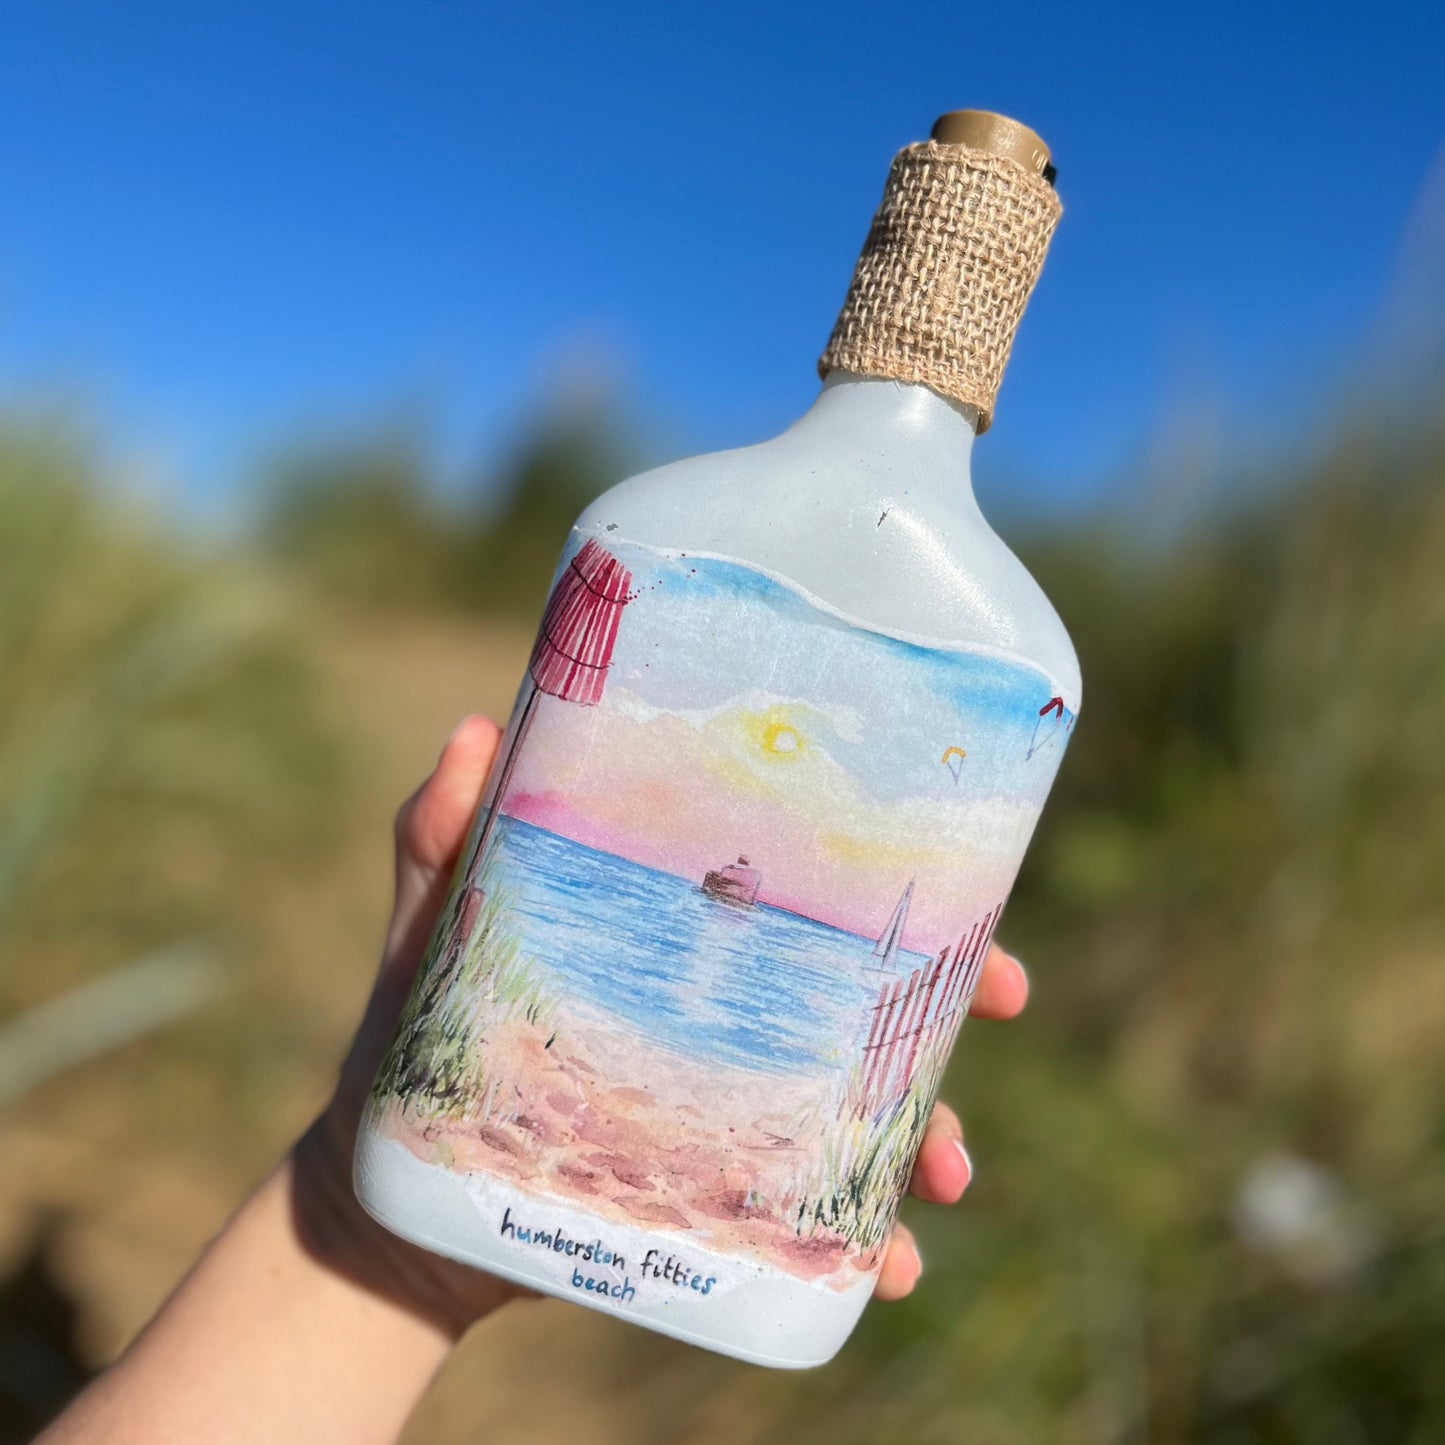 A decoupaged bottle on Cleethorpes beach, featuring watercolour artwork of the Humberston Fitties by Eve Leoni Smith and Jollypotz.